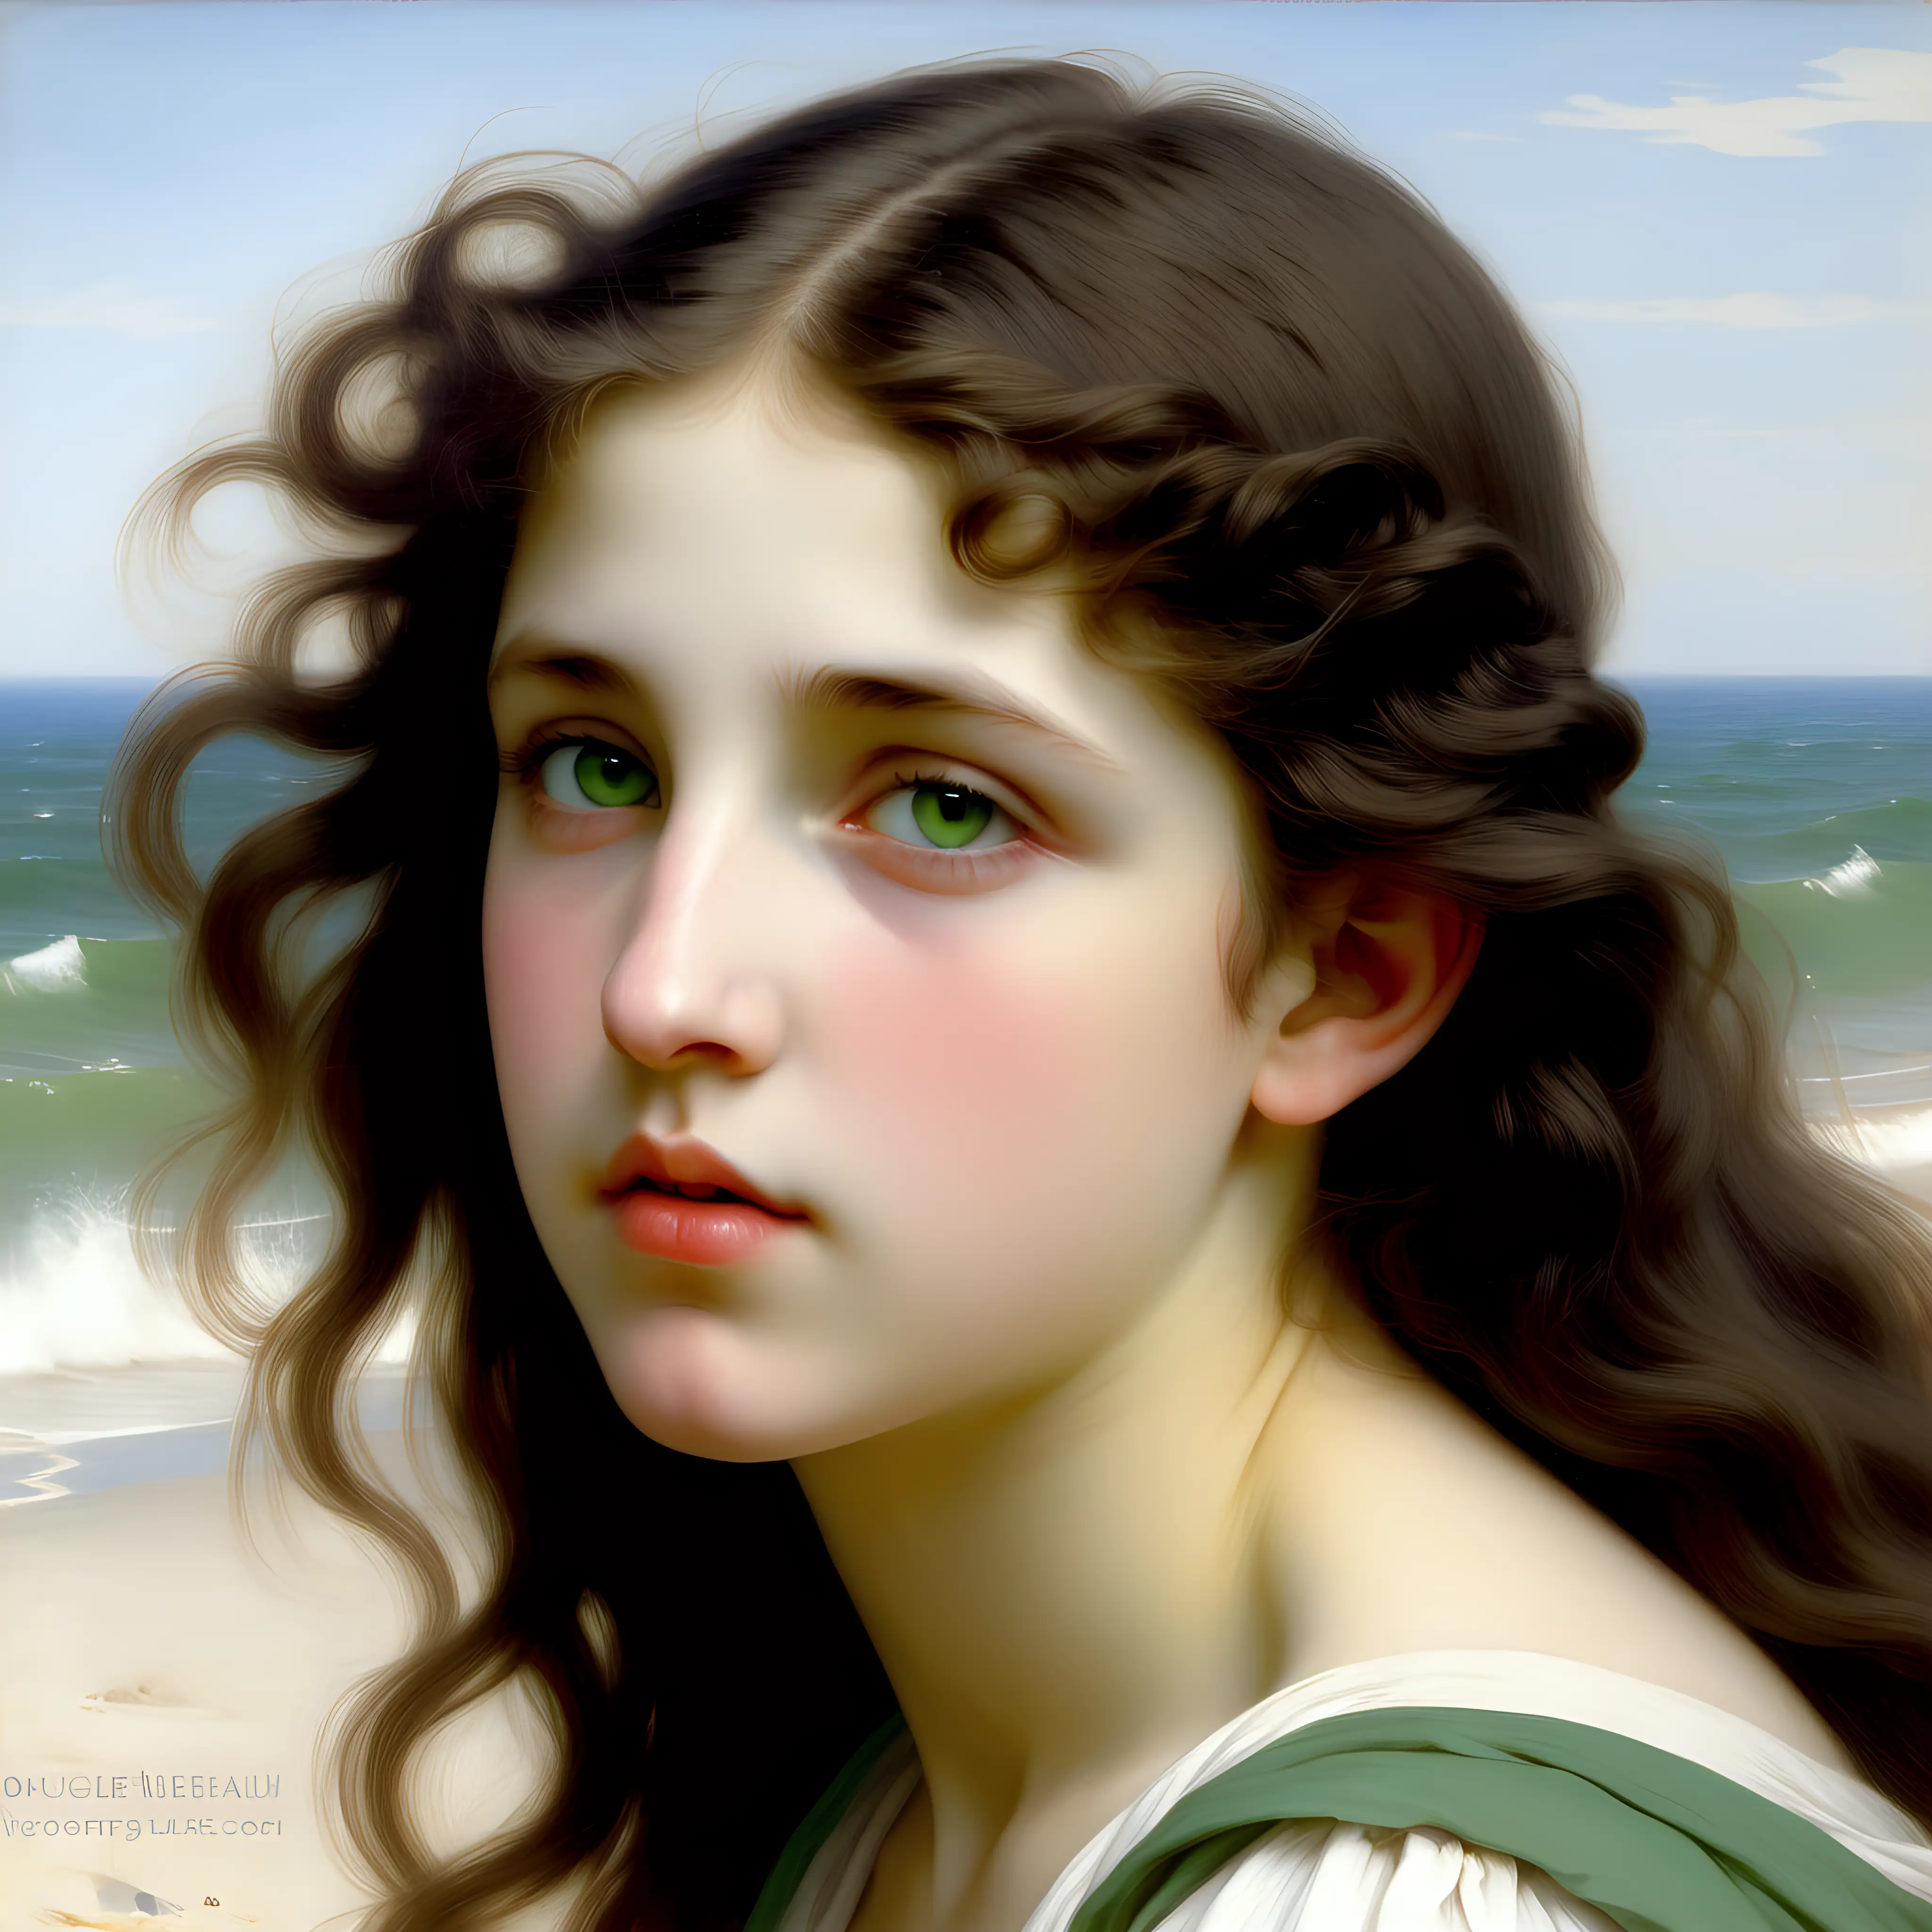 Bouguereau Beautiful Girl with Green Eyes Serene Side Profile by the Beach